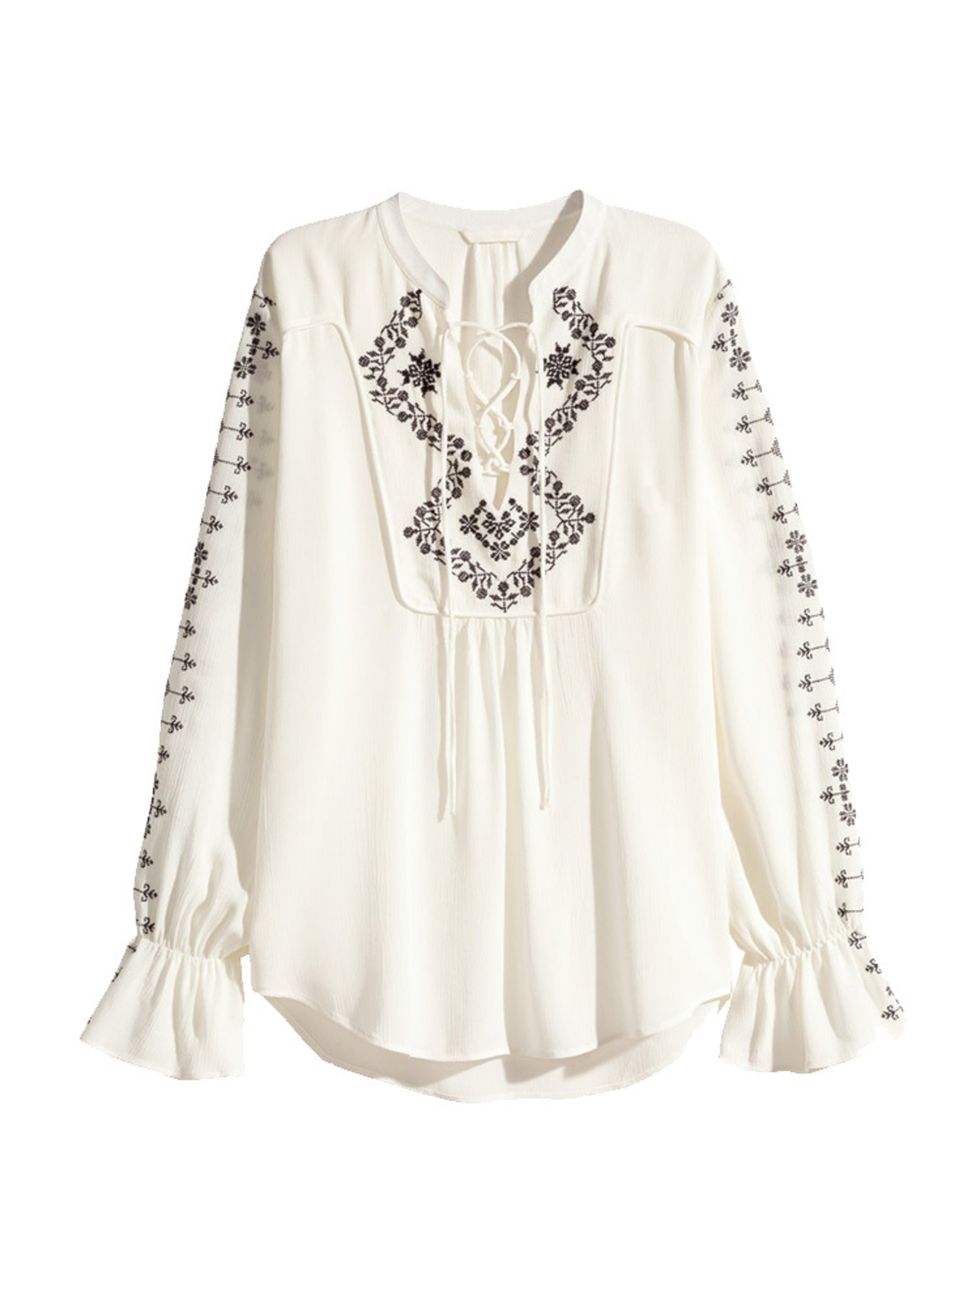 <p>Culture Director Lena De Casparis will wear this folk inspired blouse with tailored shorts - serious Riviera vibes. </p>

<p> </p>

<p><a href="http://www.hm.com/gb/product/31902?article=31902-A" target="_blank">H&M</a> Blouse, £29.99</p>